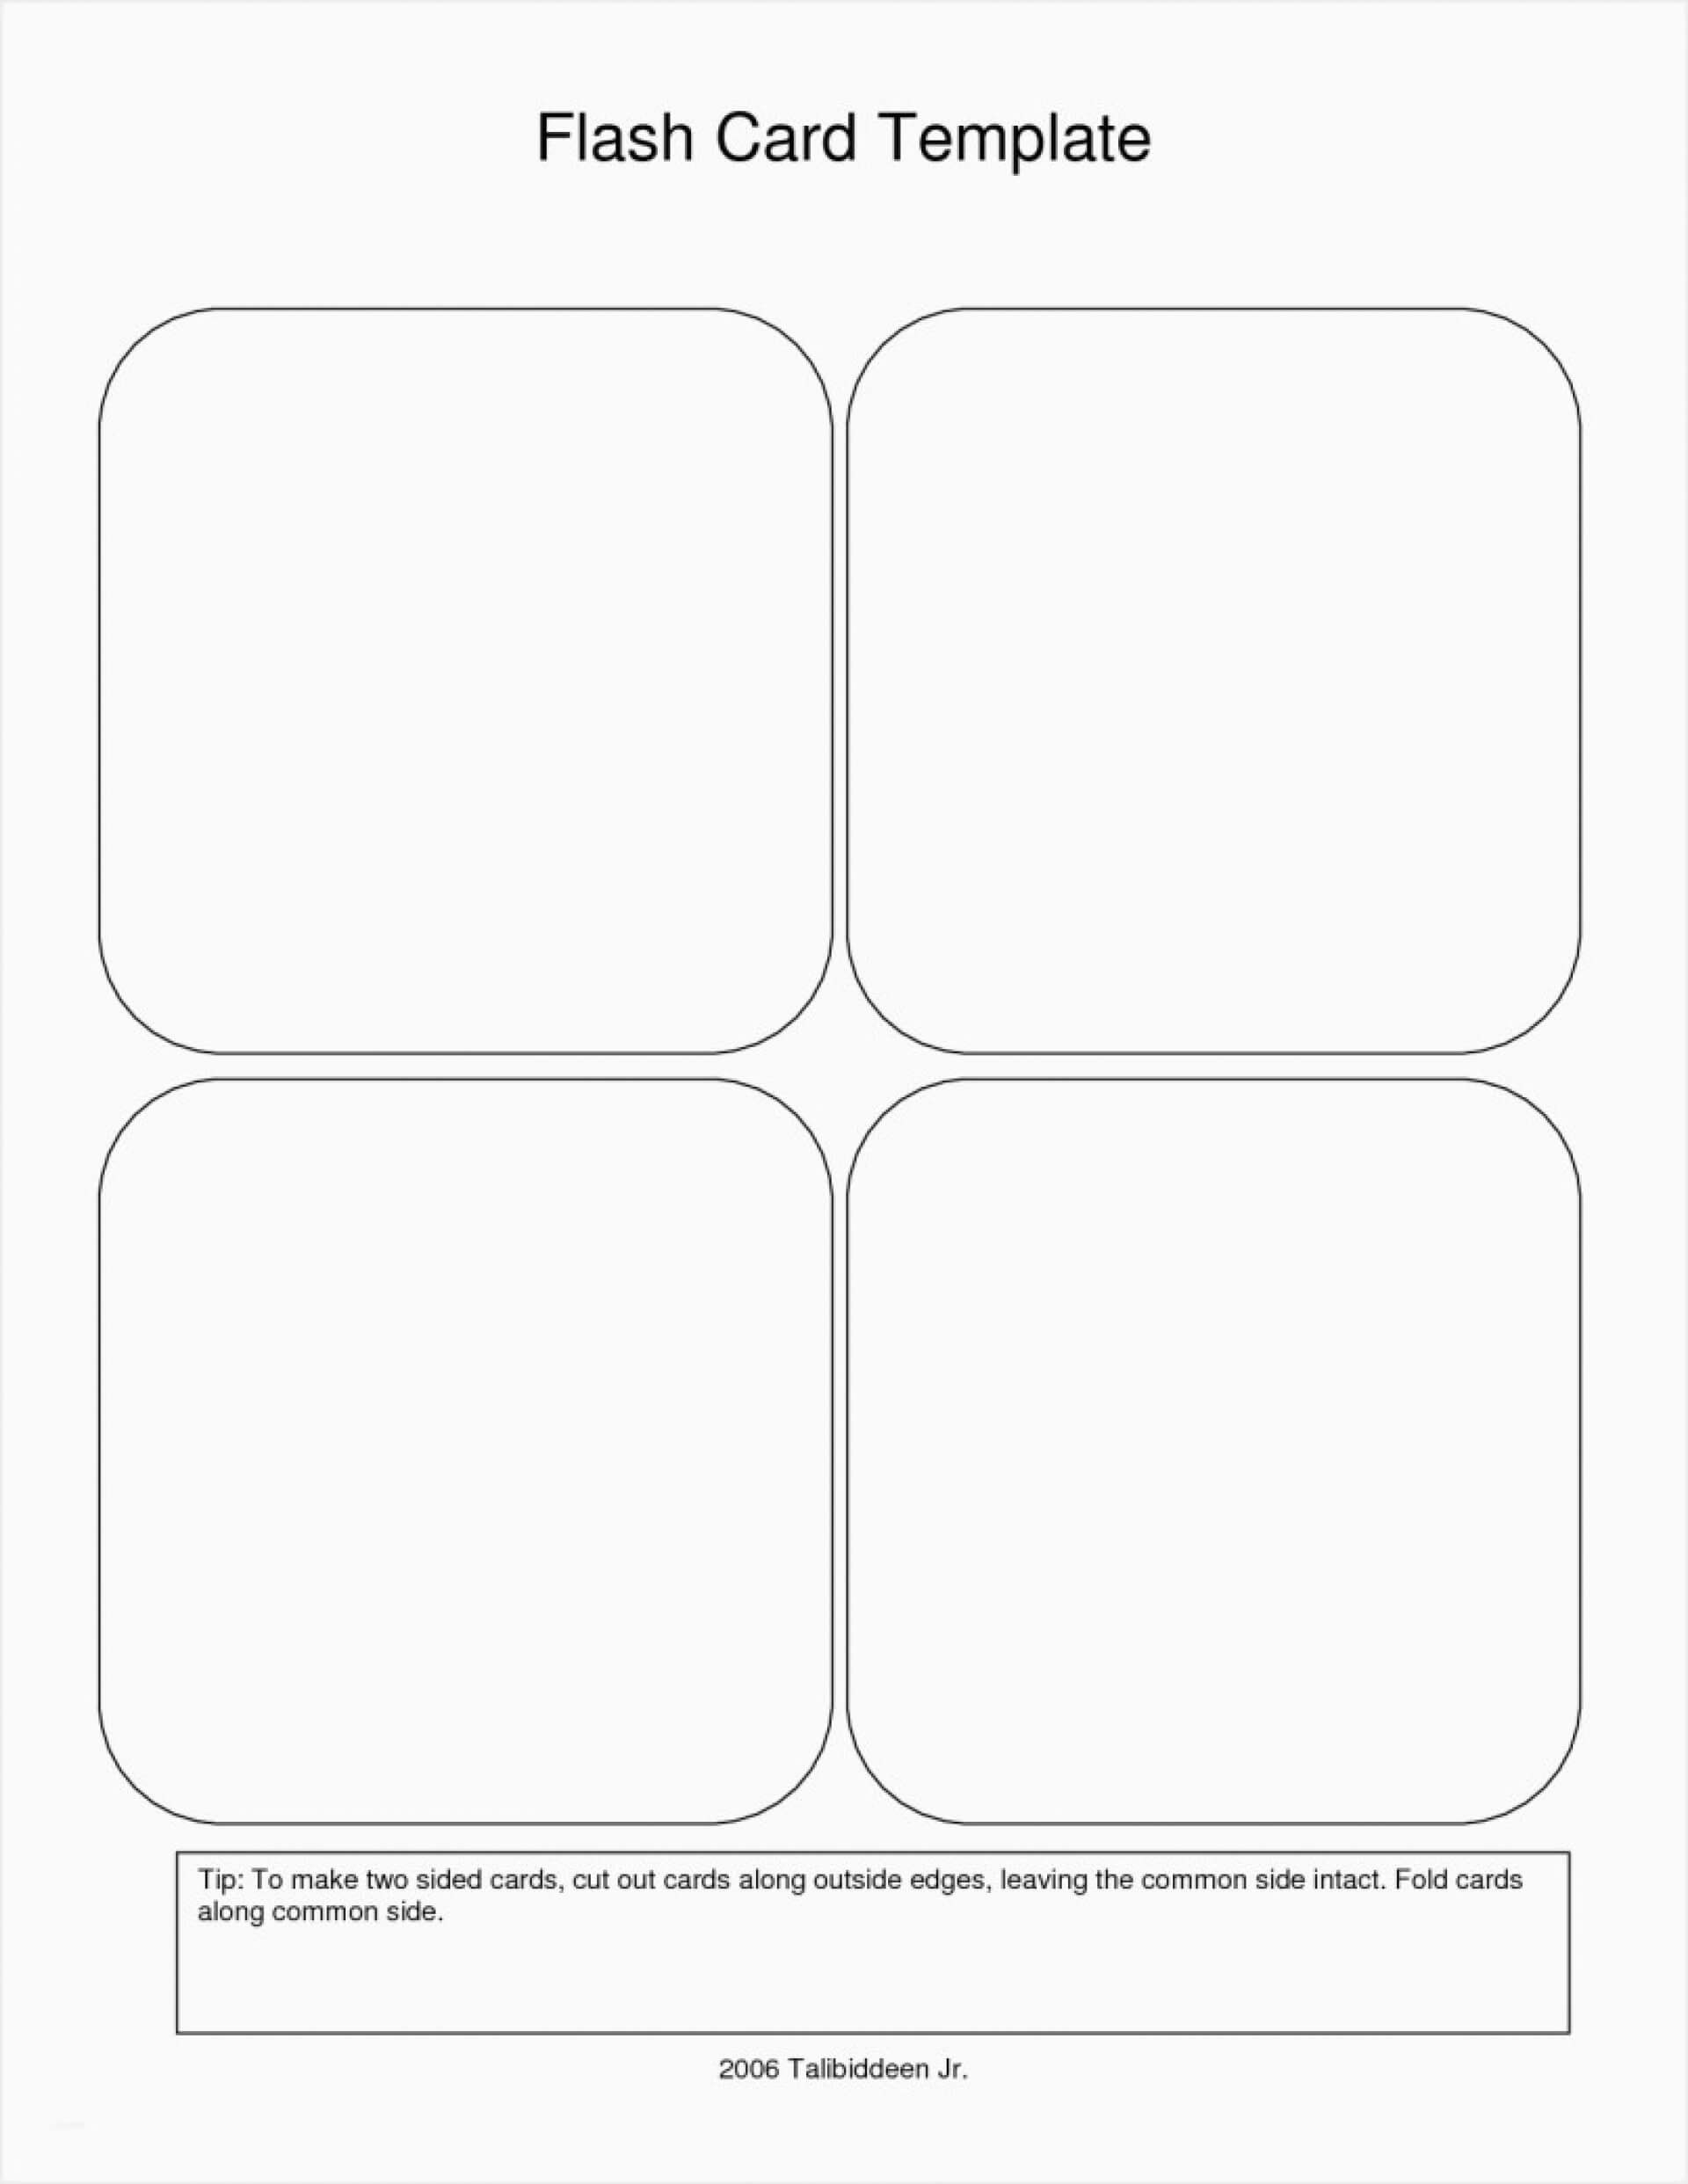 017 Flash Card Template Word Ideas Flashcard Best Of Free With Free Printable Blank Flash Cards Template